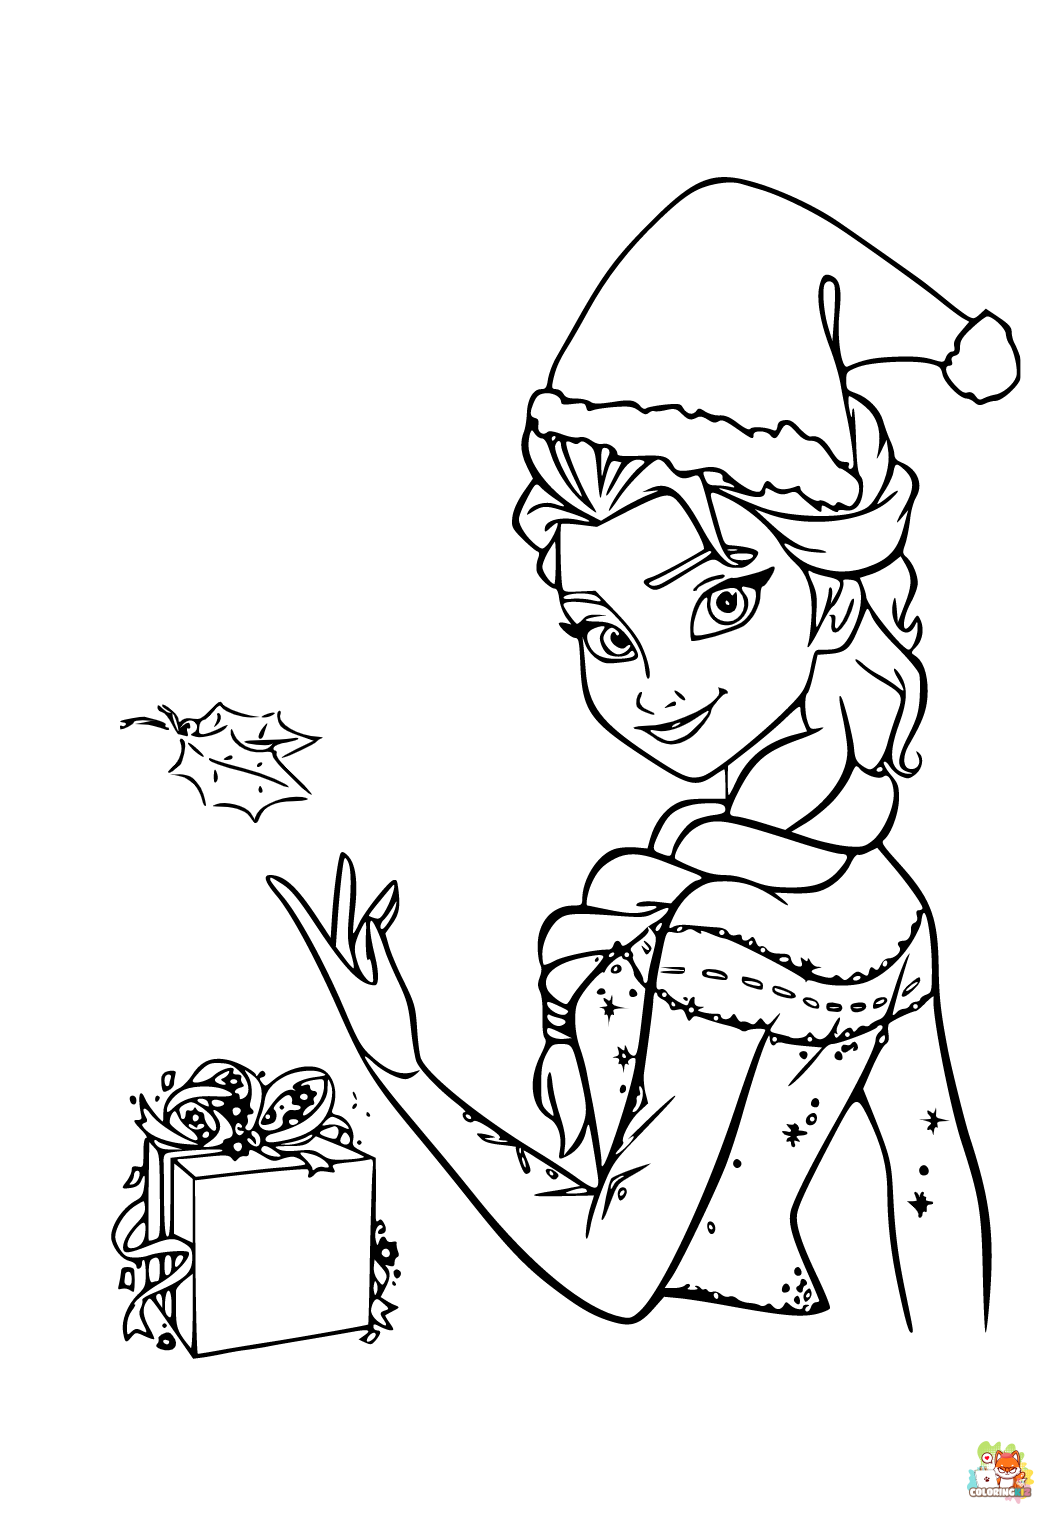 Merry Christmas With Elsa Coloring Pages 1